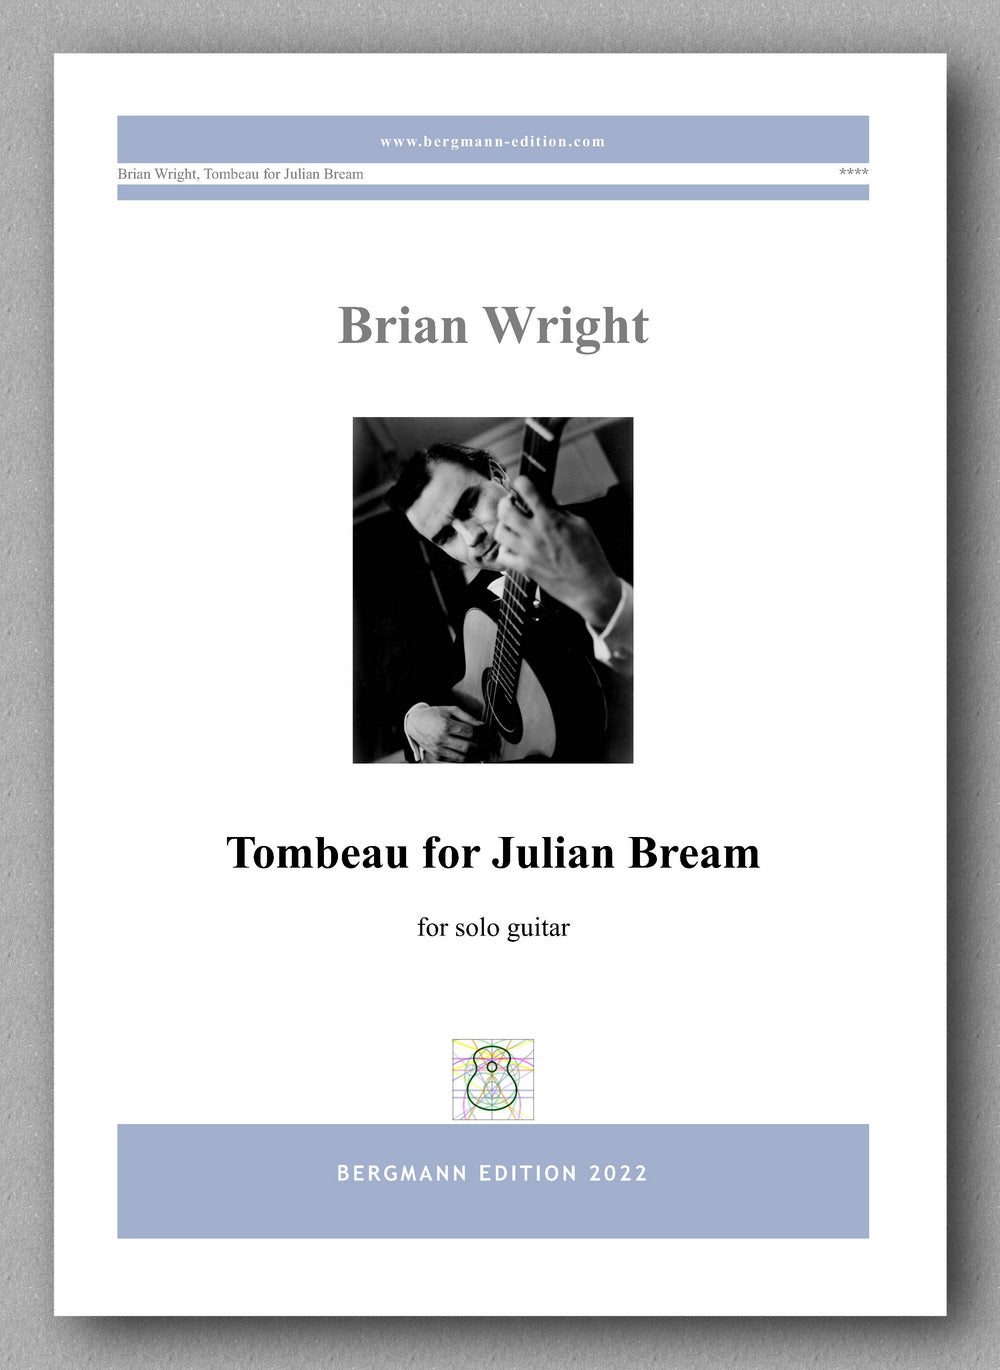 Brian Wright, Tombeau for Julian Bream - preview of the cover